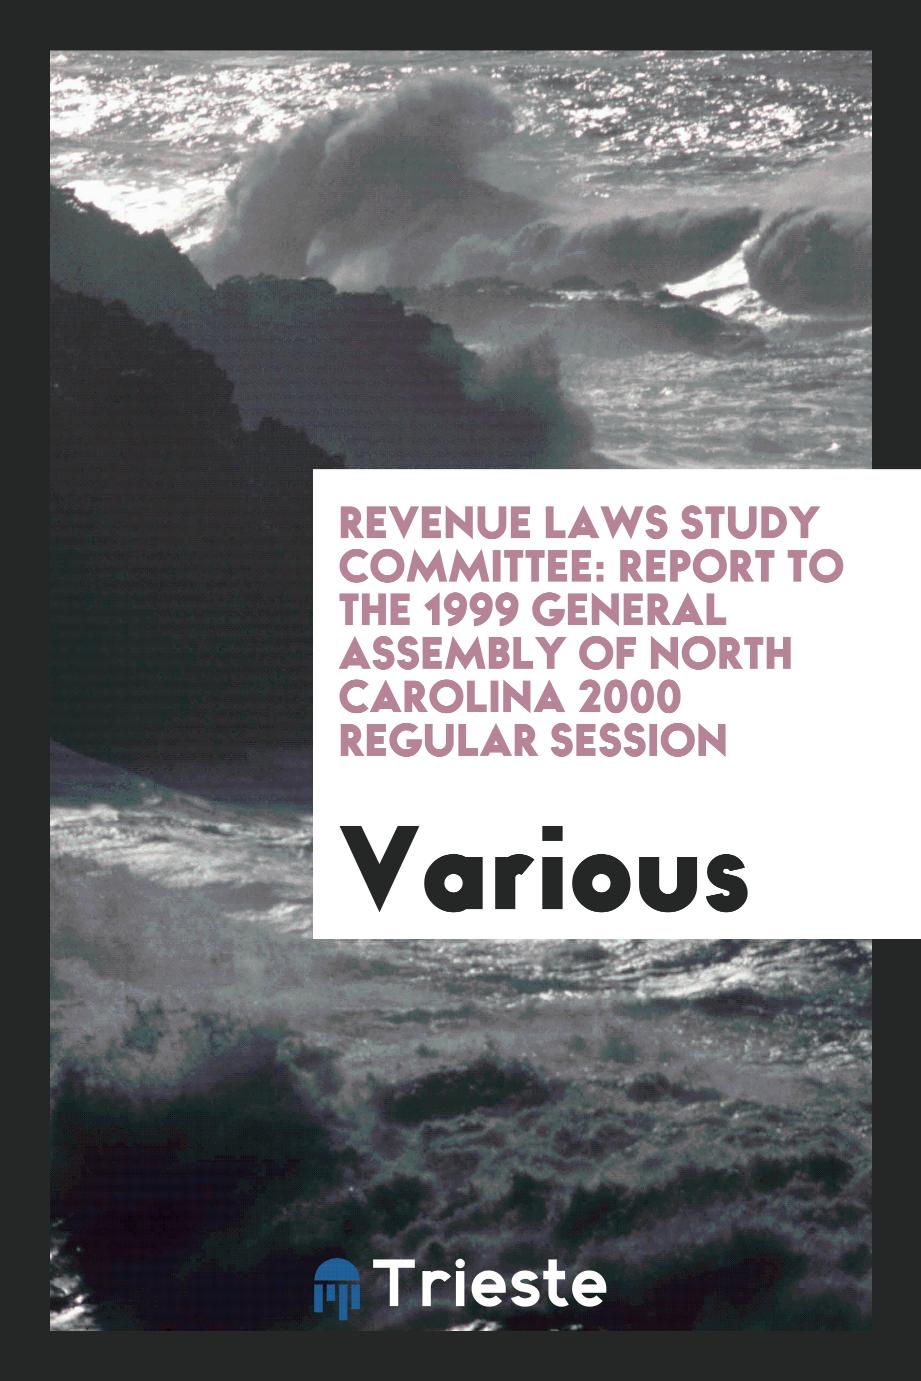 Revenue Laws Study Committee: report to the 1999 General Assembly of North Carolina 2000 regular session